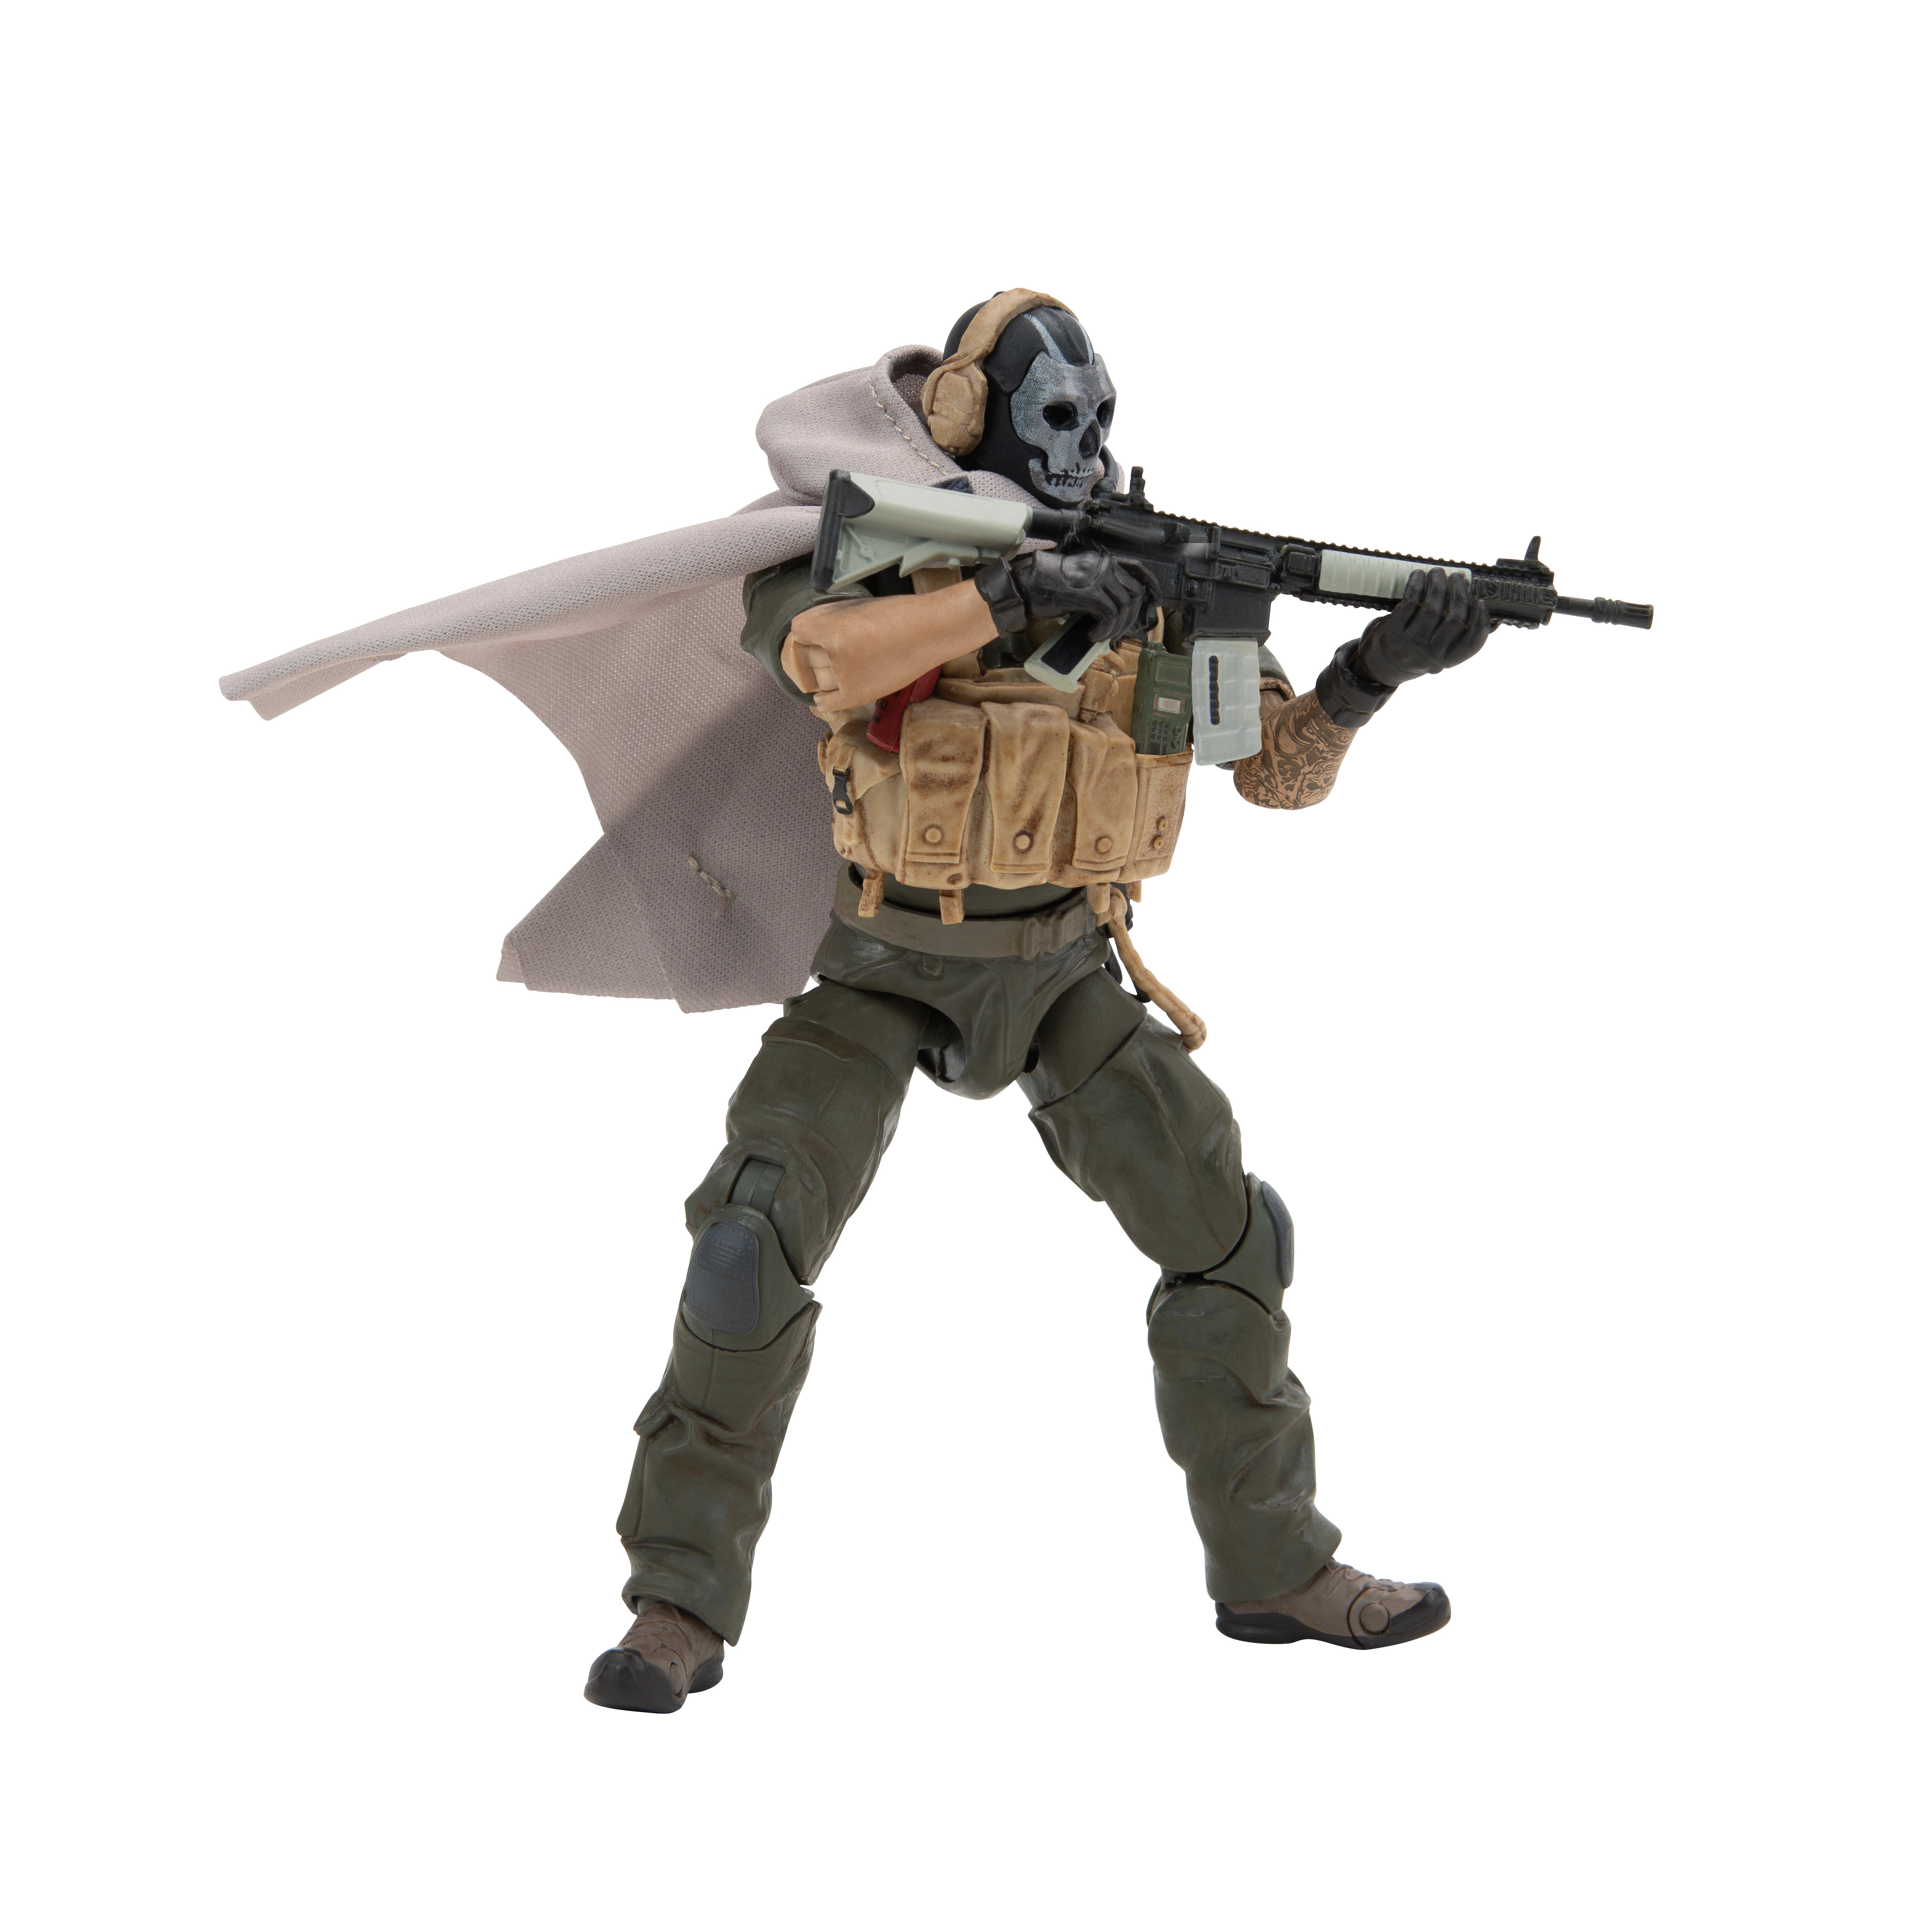 Jazwares Call of Duty: Modern Warfare 2 Ghost 6.5-in Action Figure